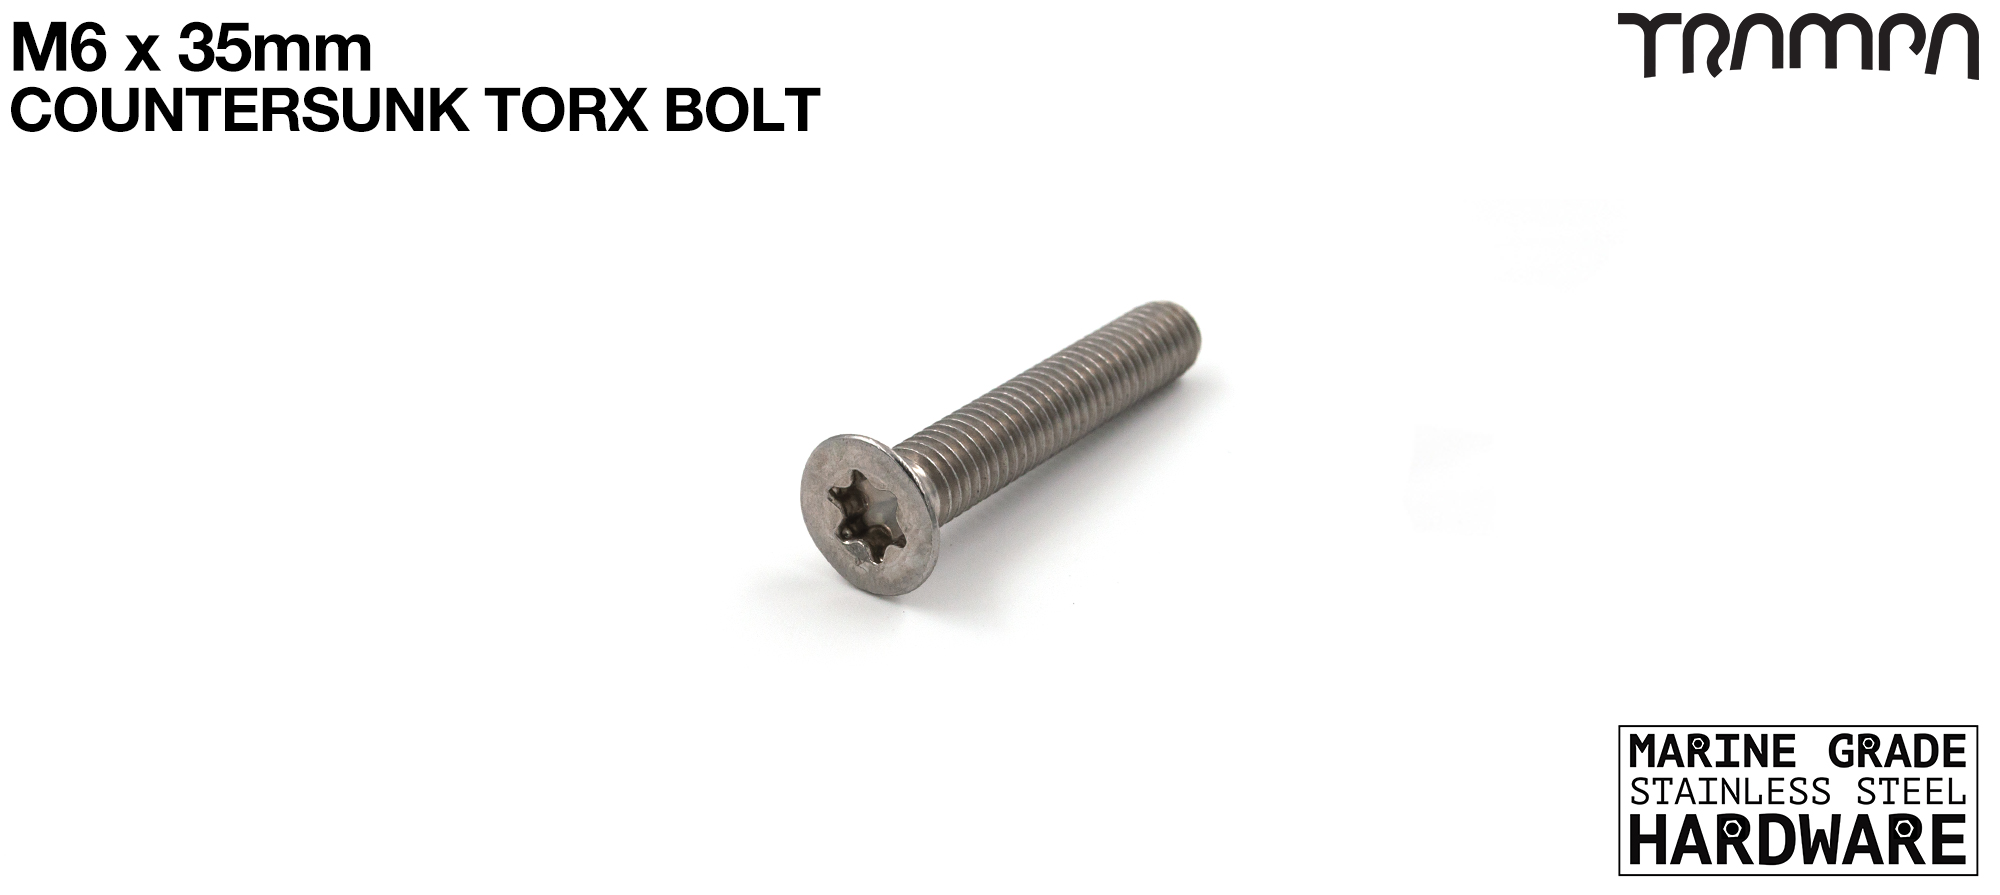 M6 x 35mm TORX Countersunk Bolt Stainless Steel 